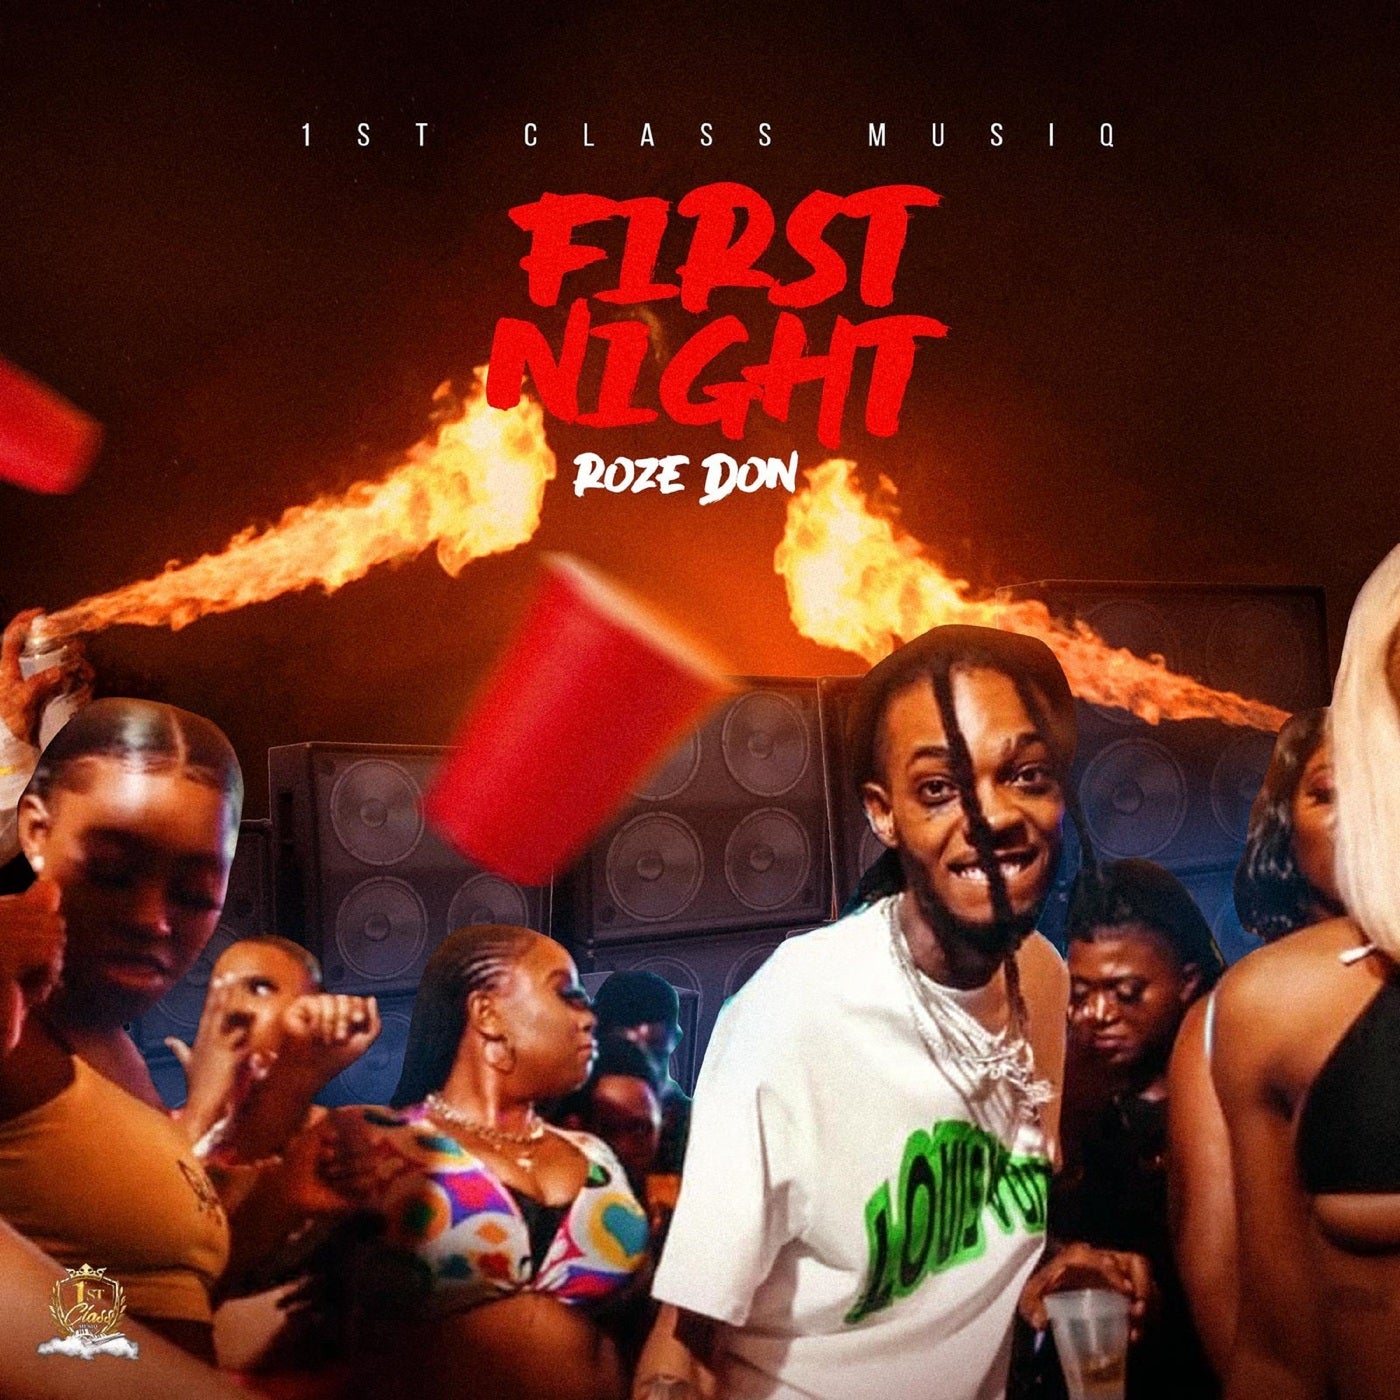 First Night by Roze Don and 1stClass on Beatsource